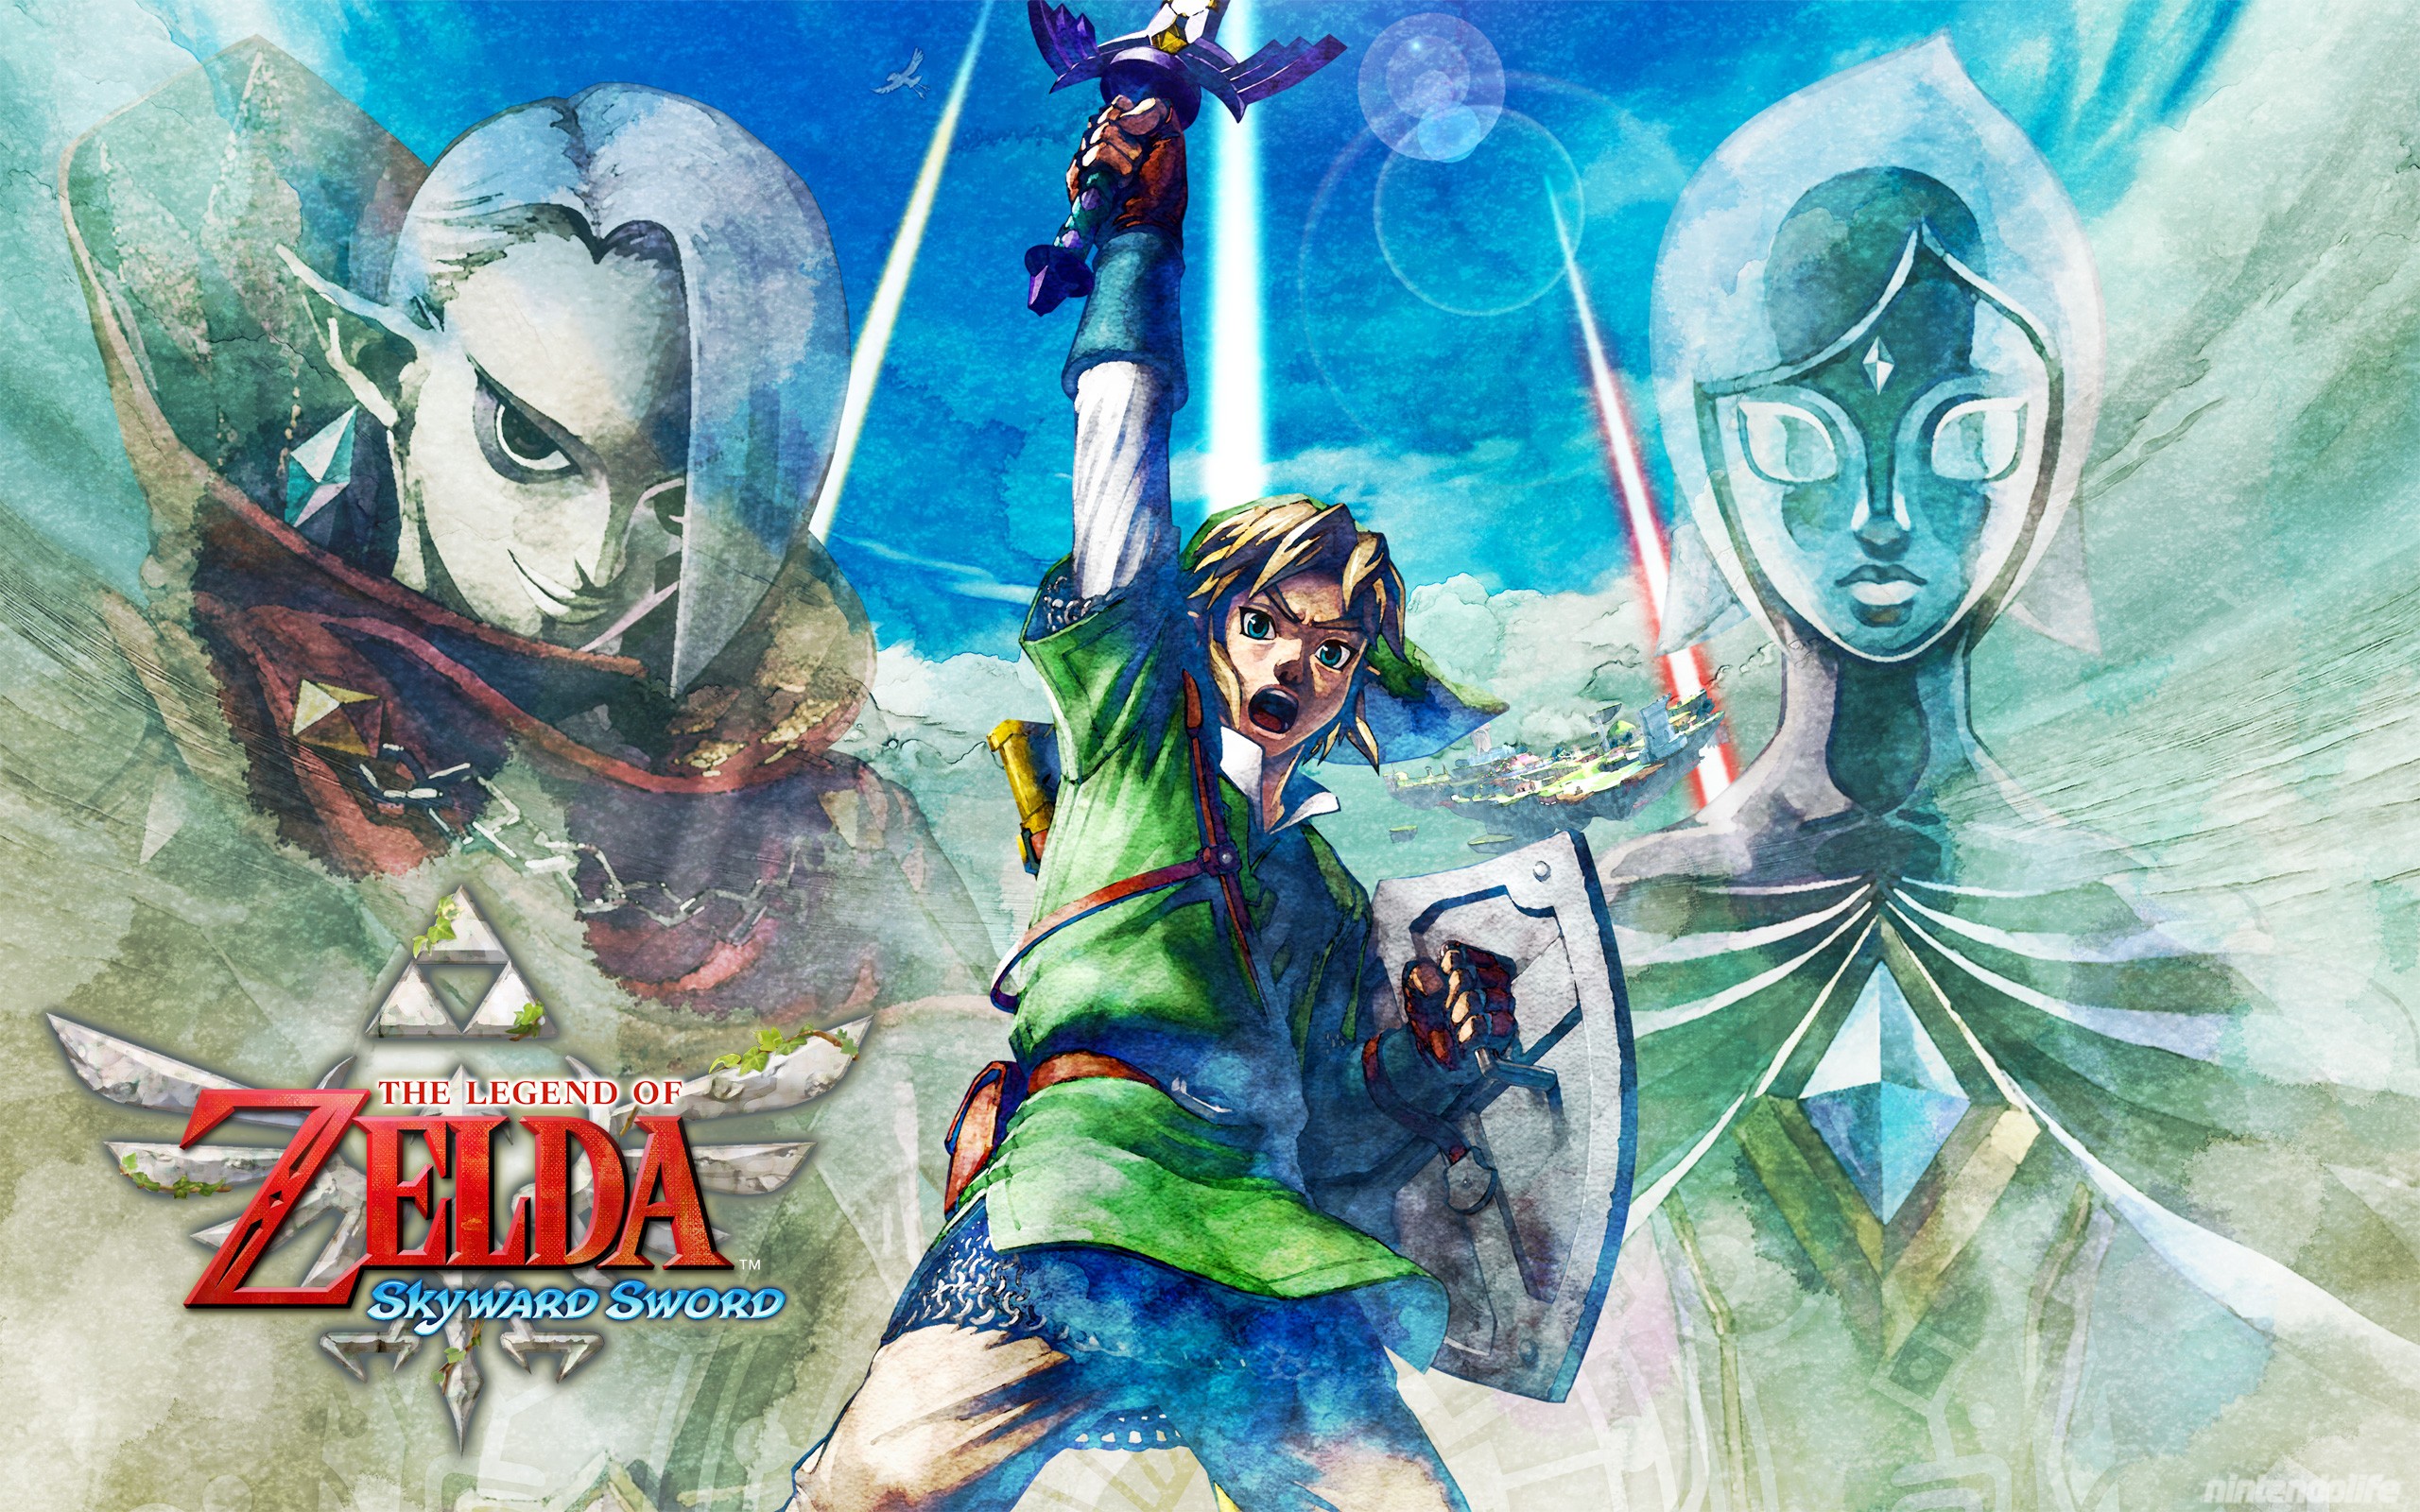 Out Today The Legend of Zelda Skyward Sword and Wallpapers